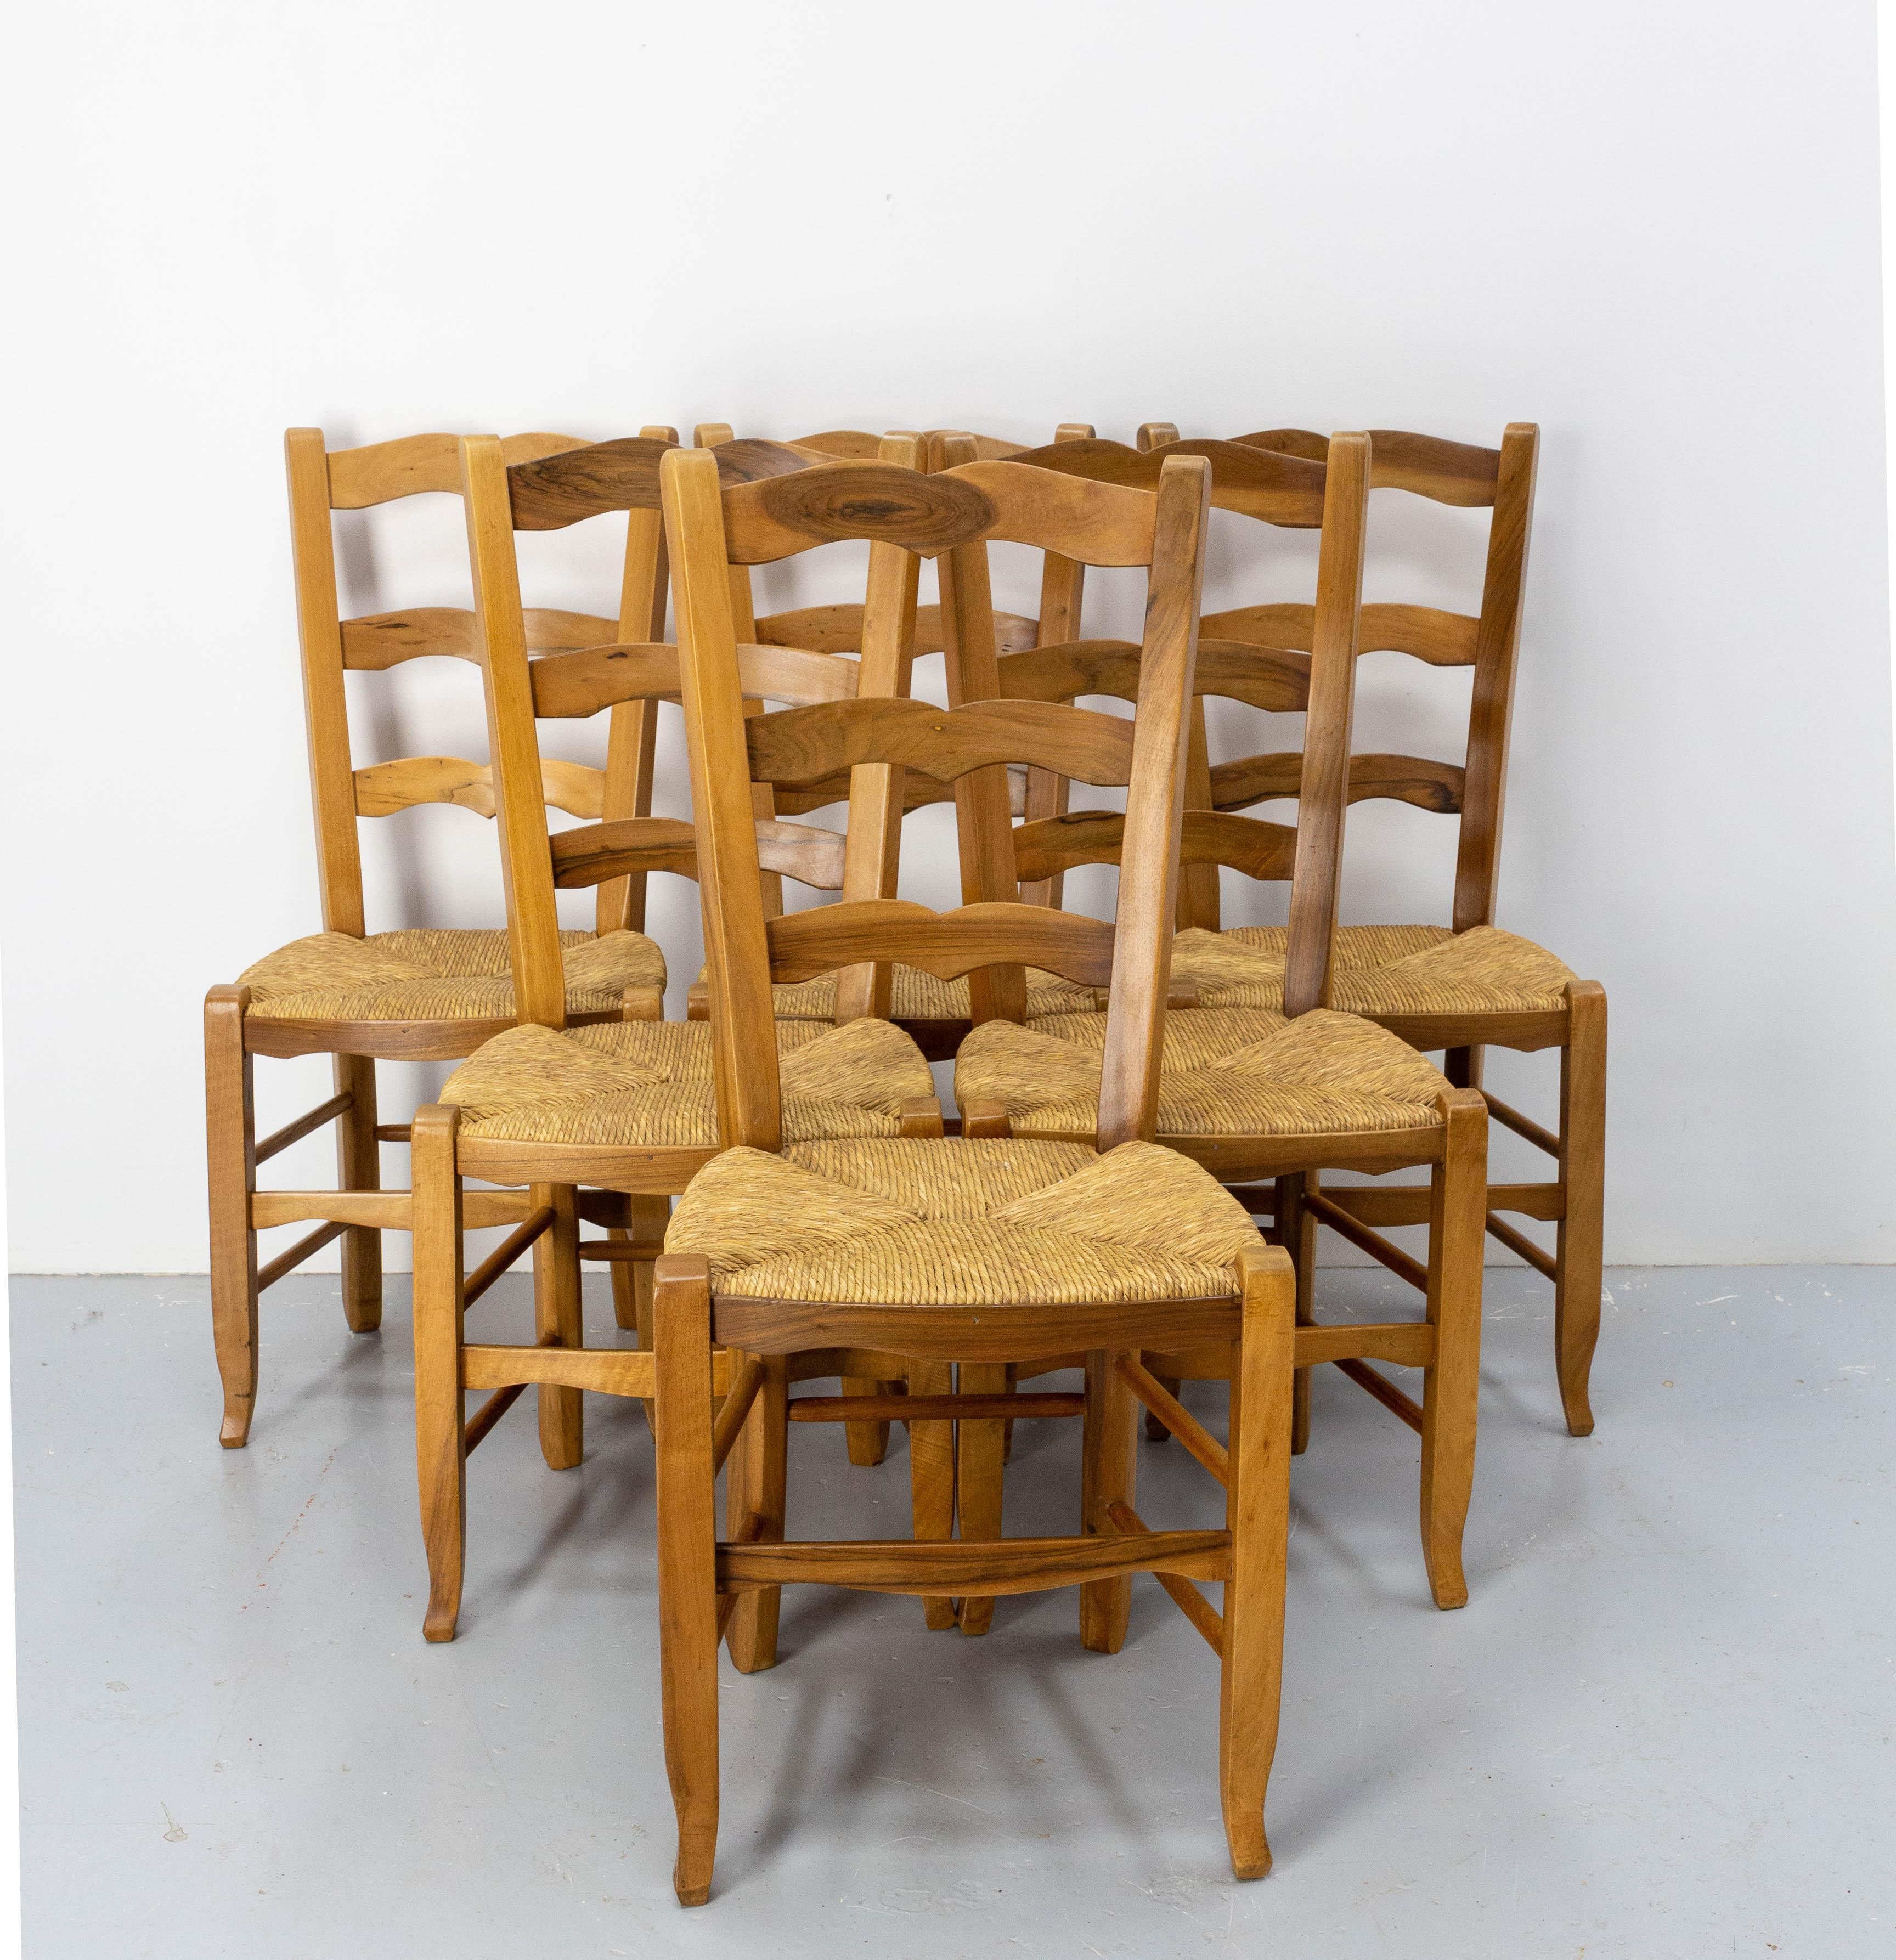 Straw and walnut chairs made in Dordogne.
Artisanal work with local walnut, the production of walnuts being one of the local specialties of the region.
A charming set of six French provincial chairs made in the 1970s.
The rush seats and backs are